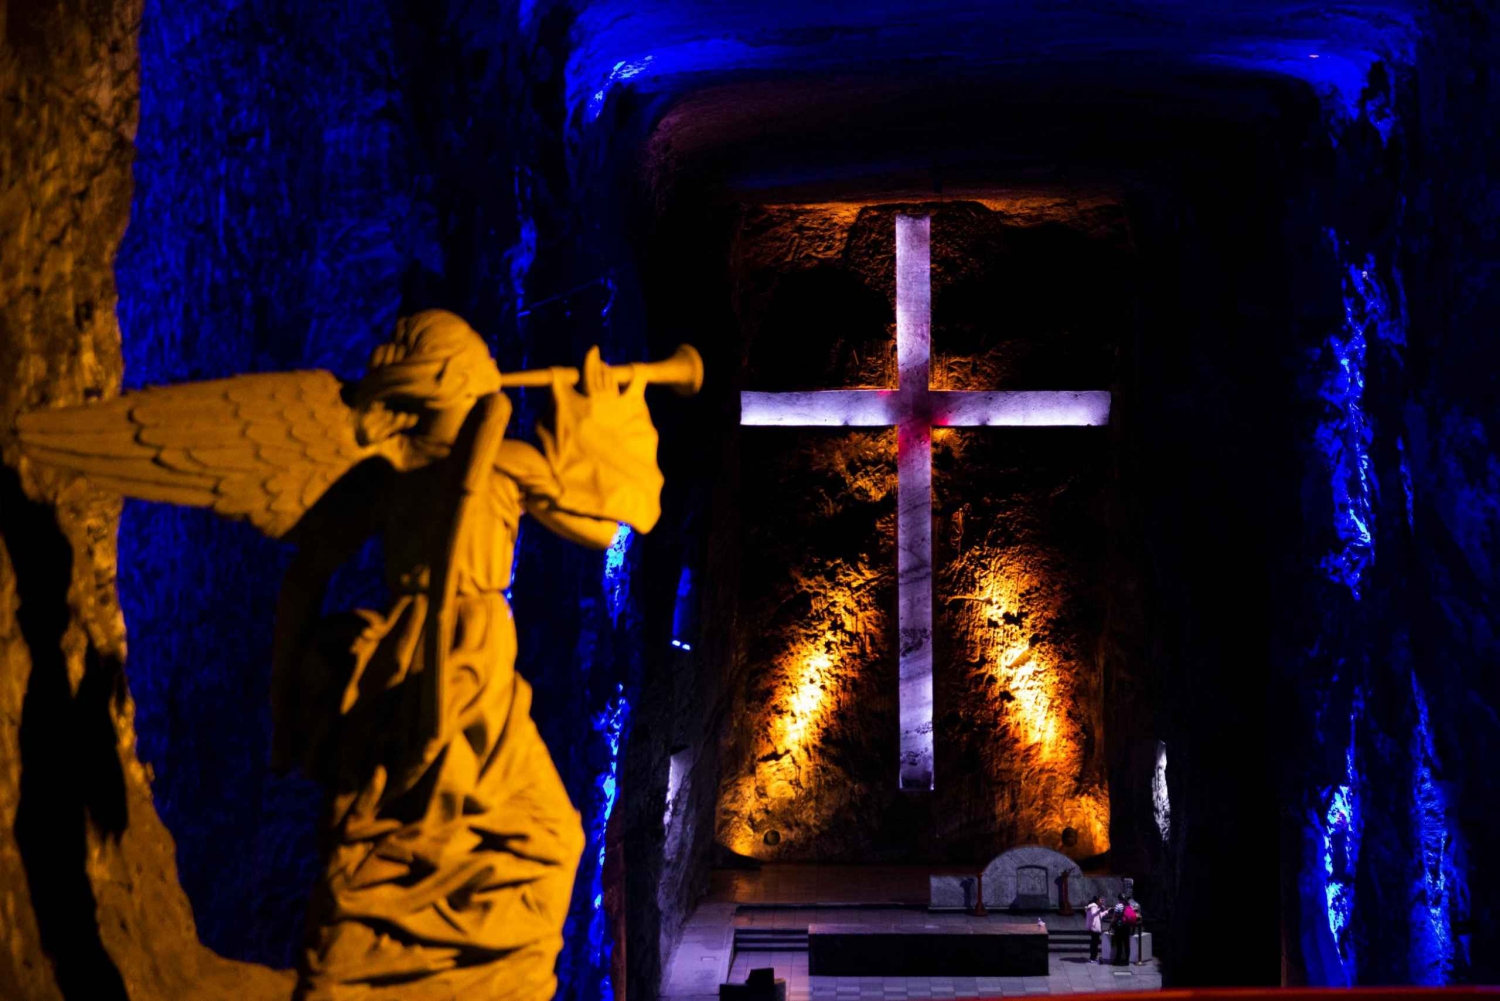 Bogotá: Private Salt Cathedral Tour with Entrance Tickets